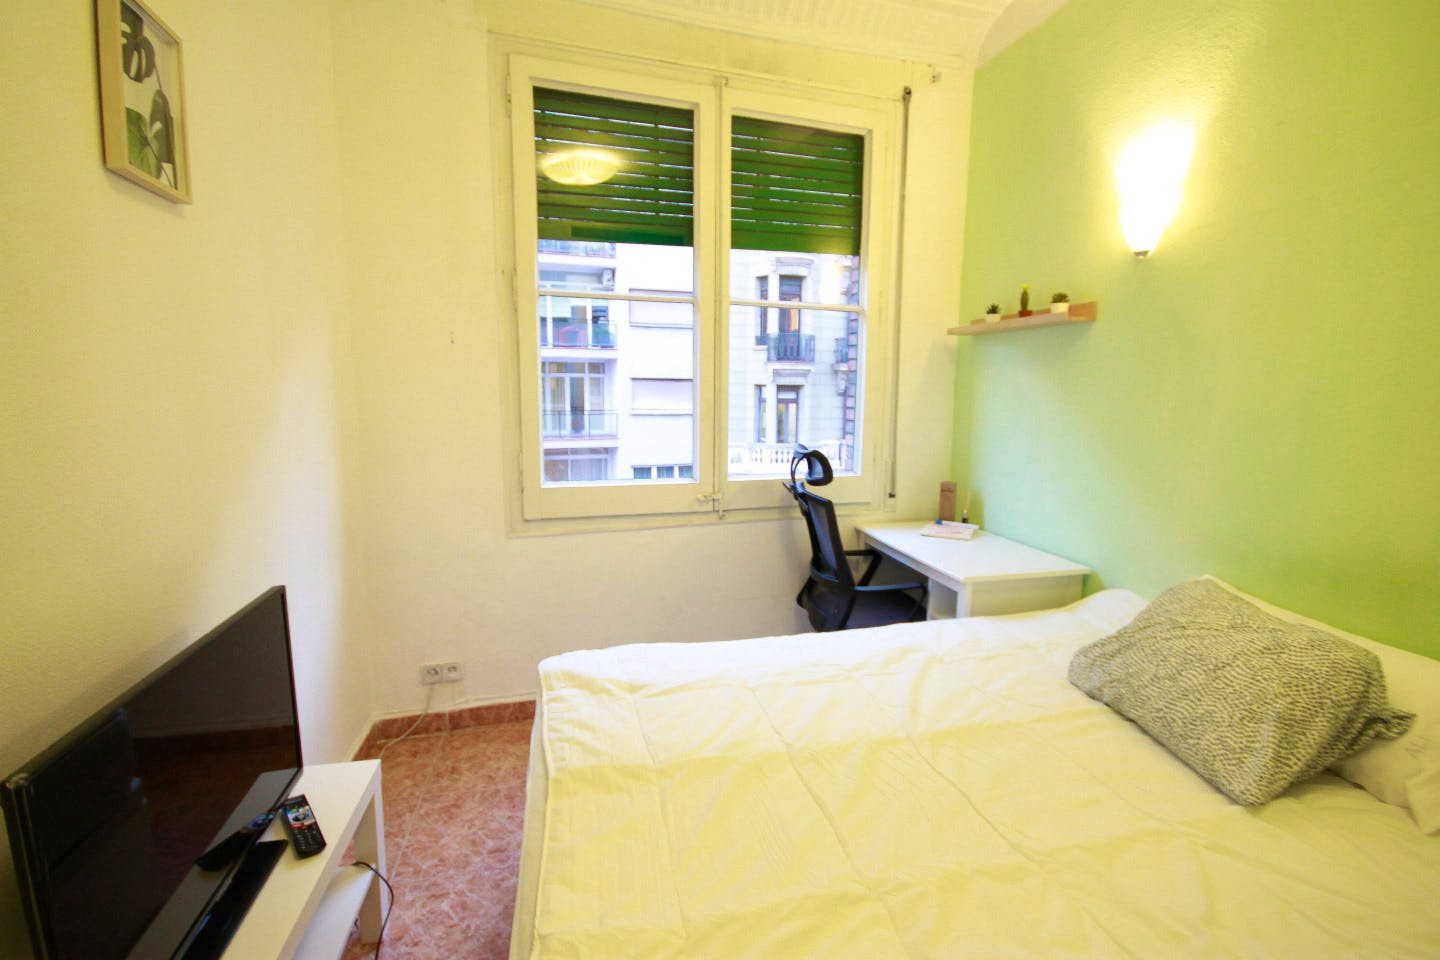 Charming apartment nearby Sant Gervasi Train Station (L6)